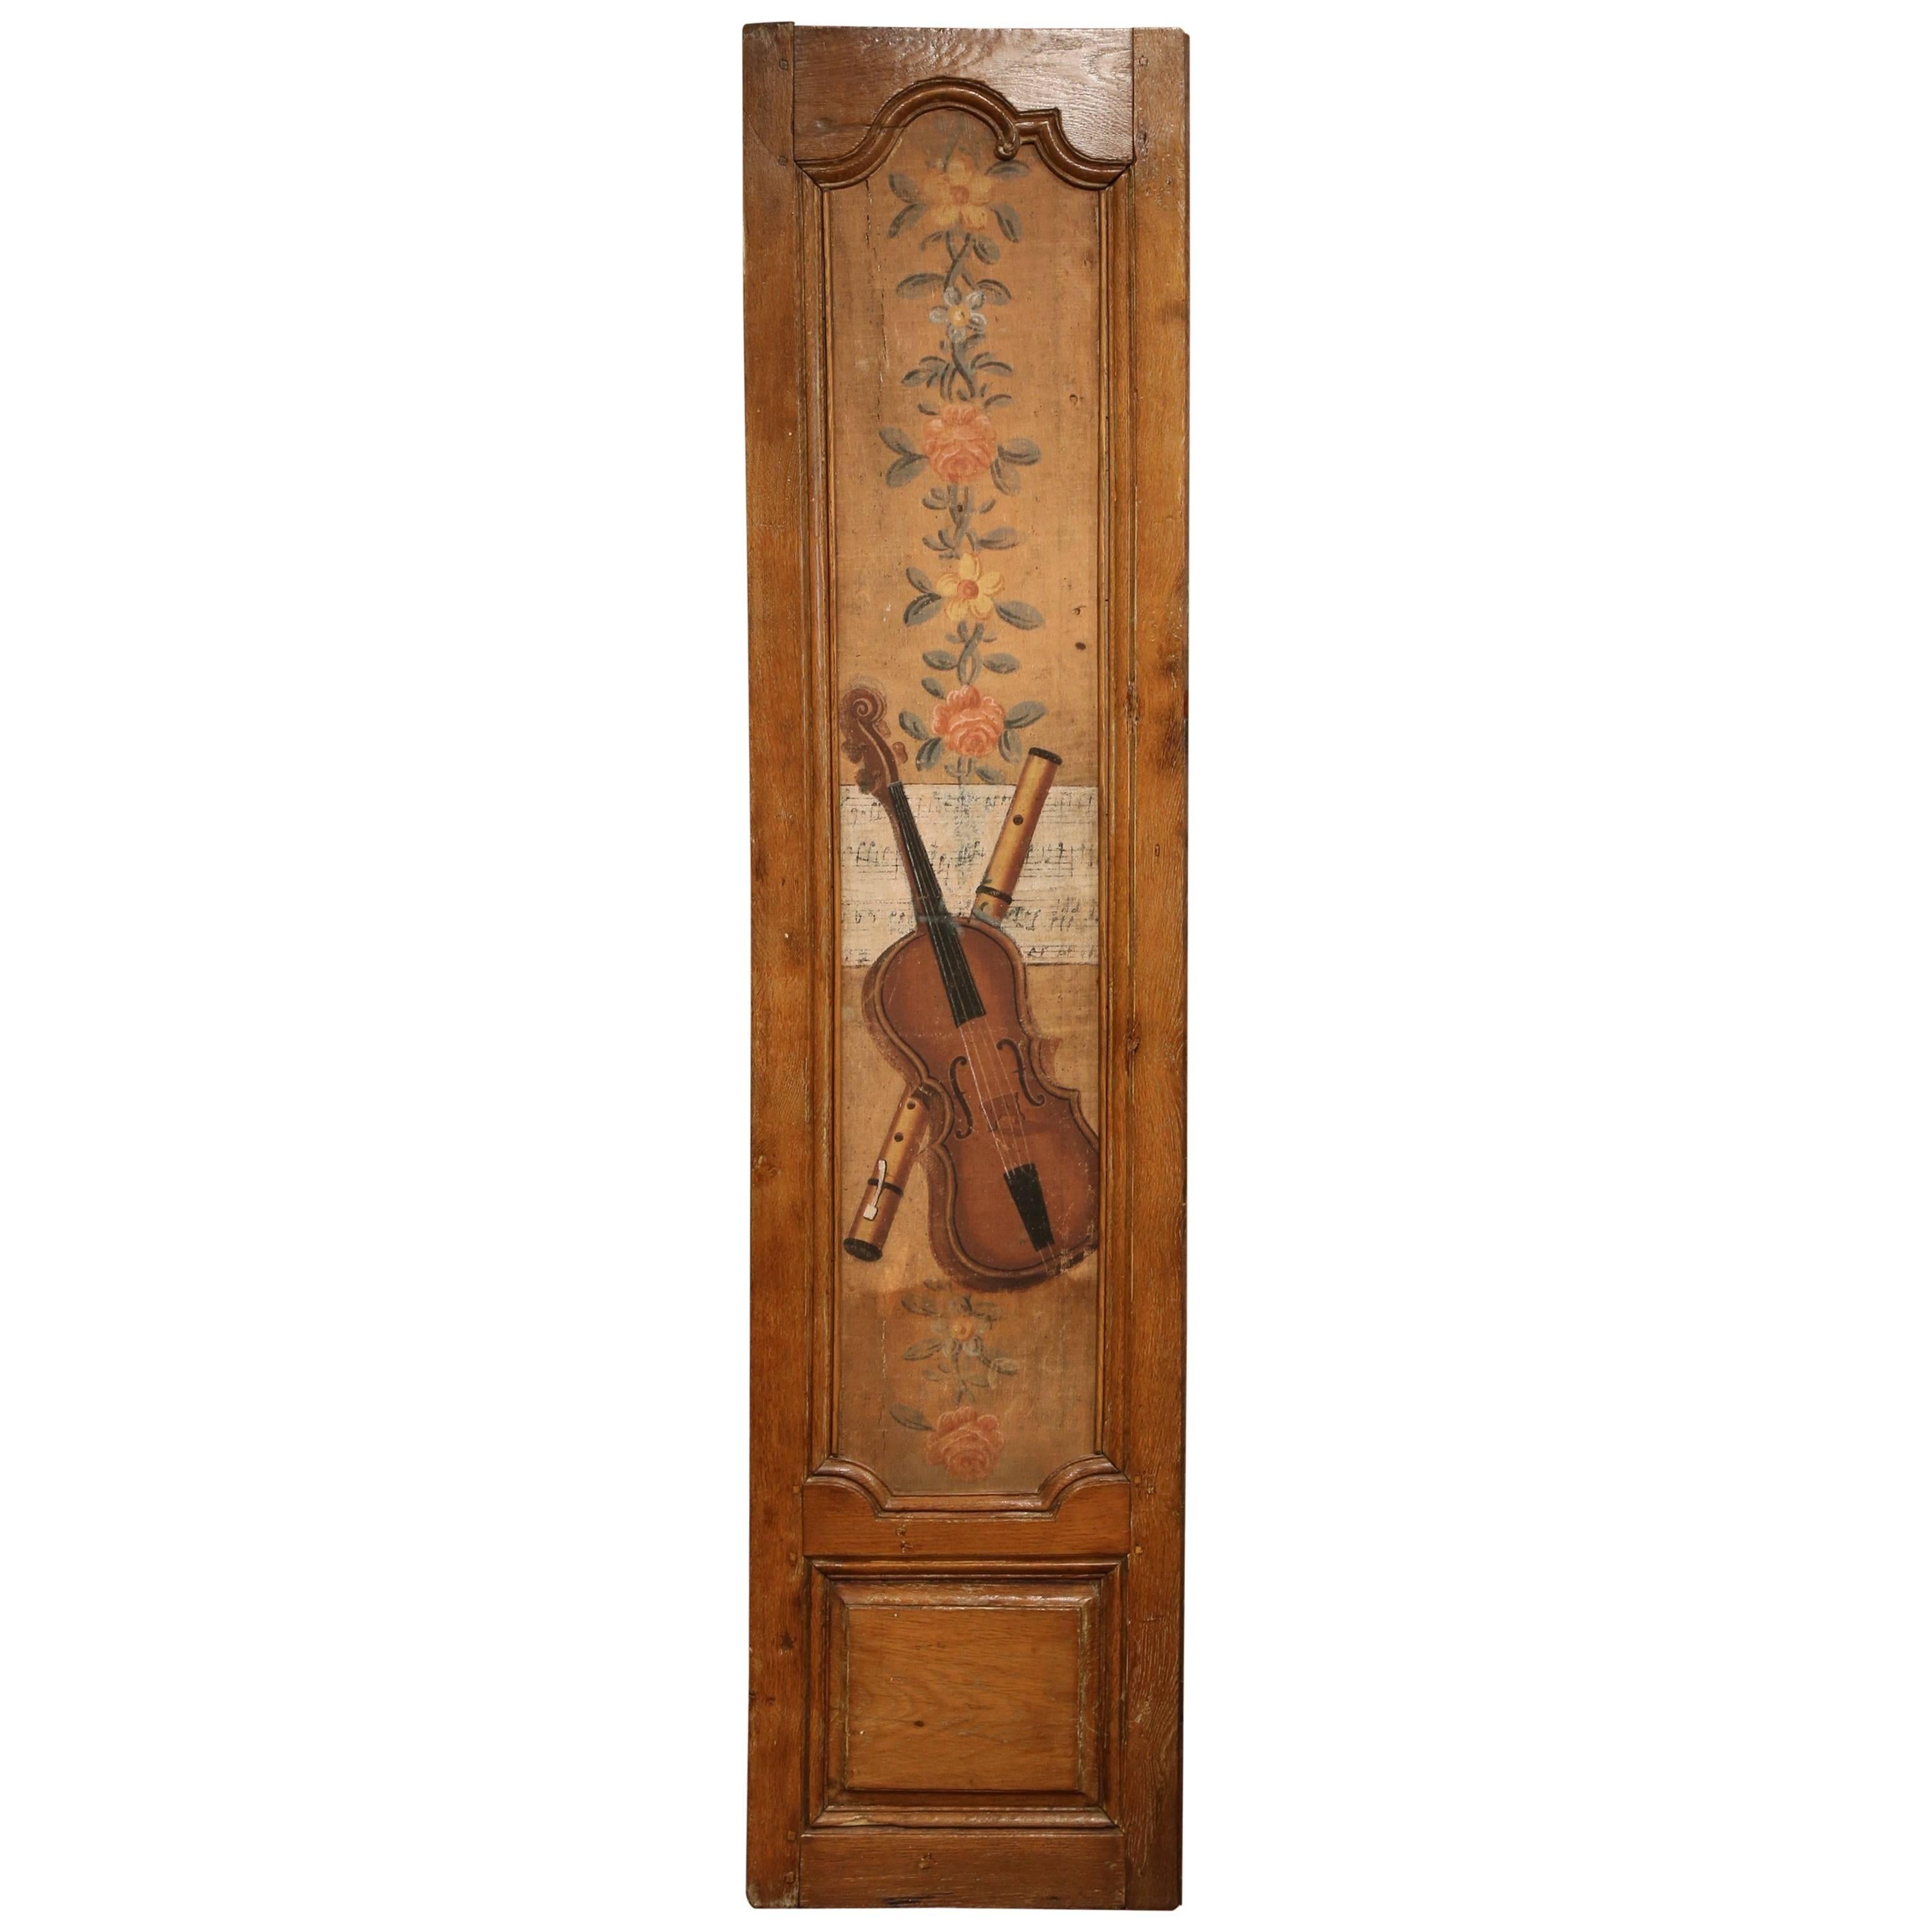 18th Century, French Carved Oak Painted Panel with Music Instruments and Flowers